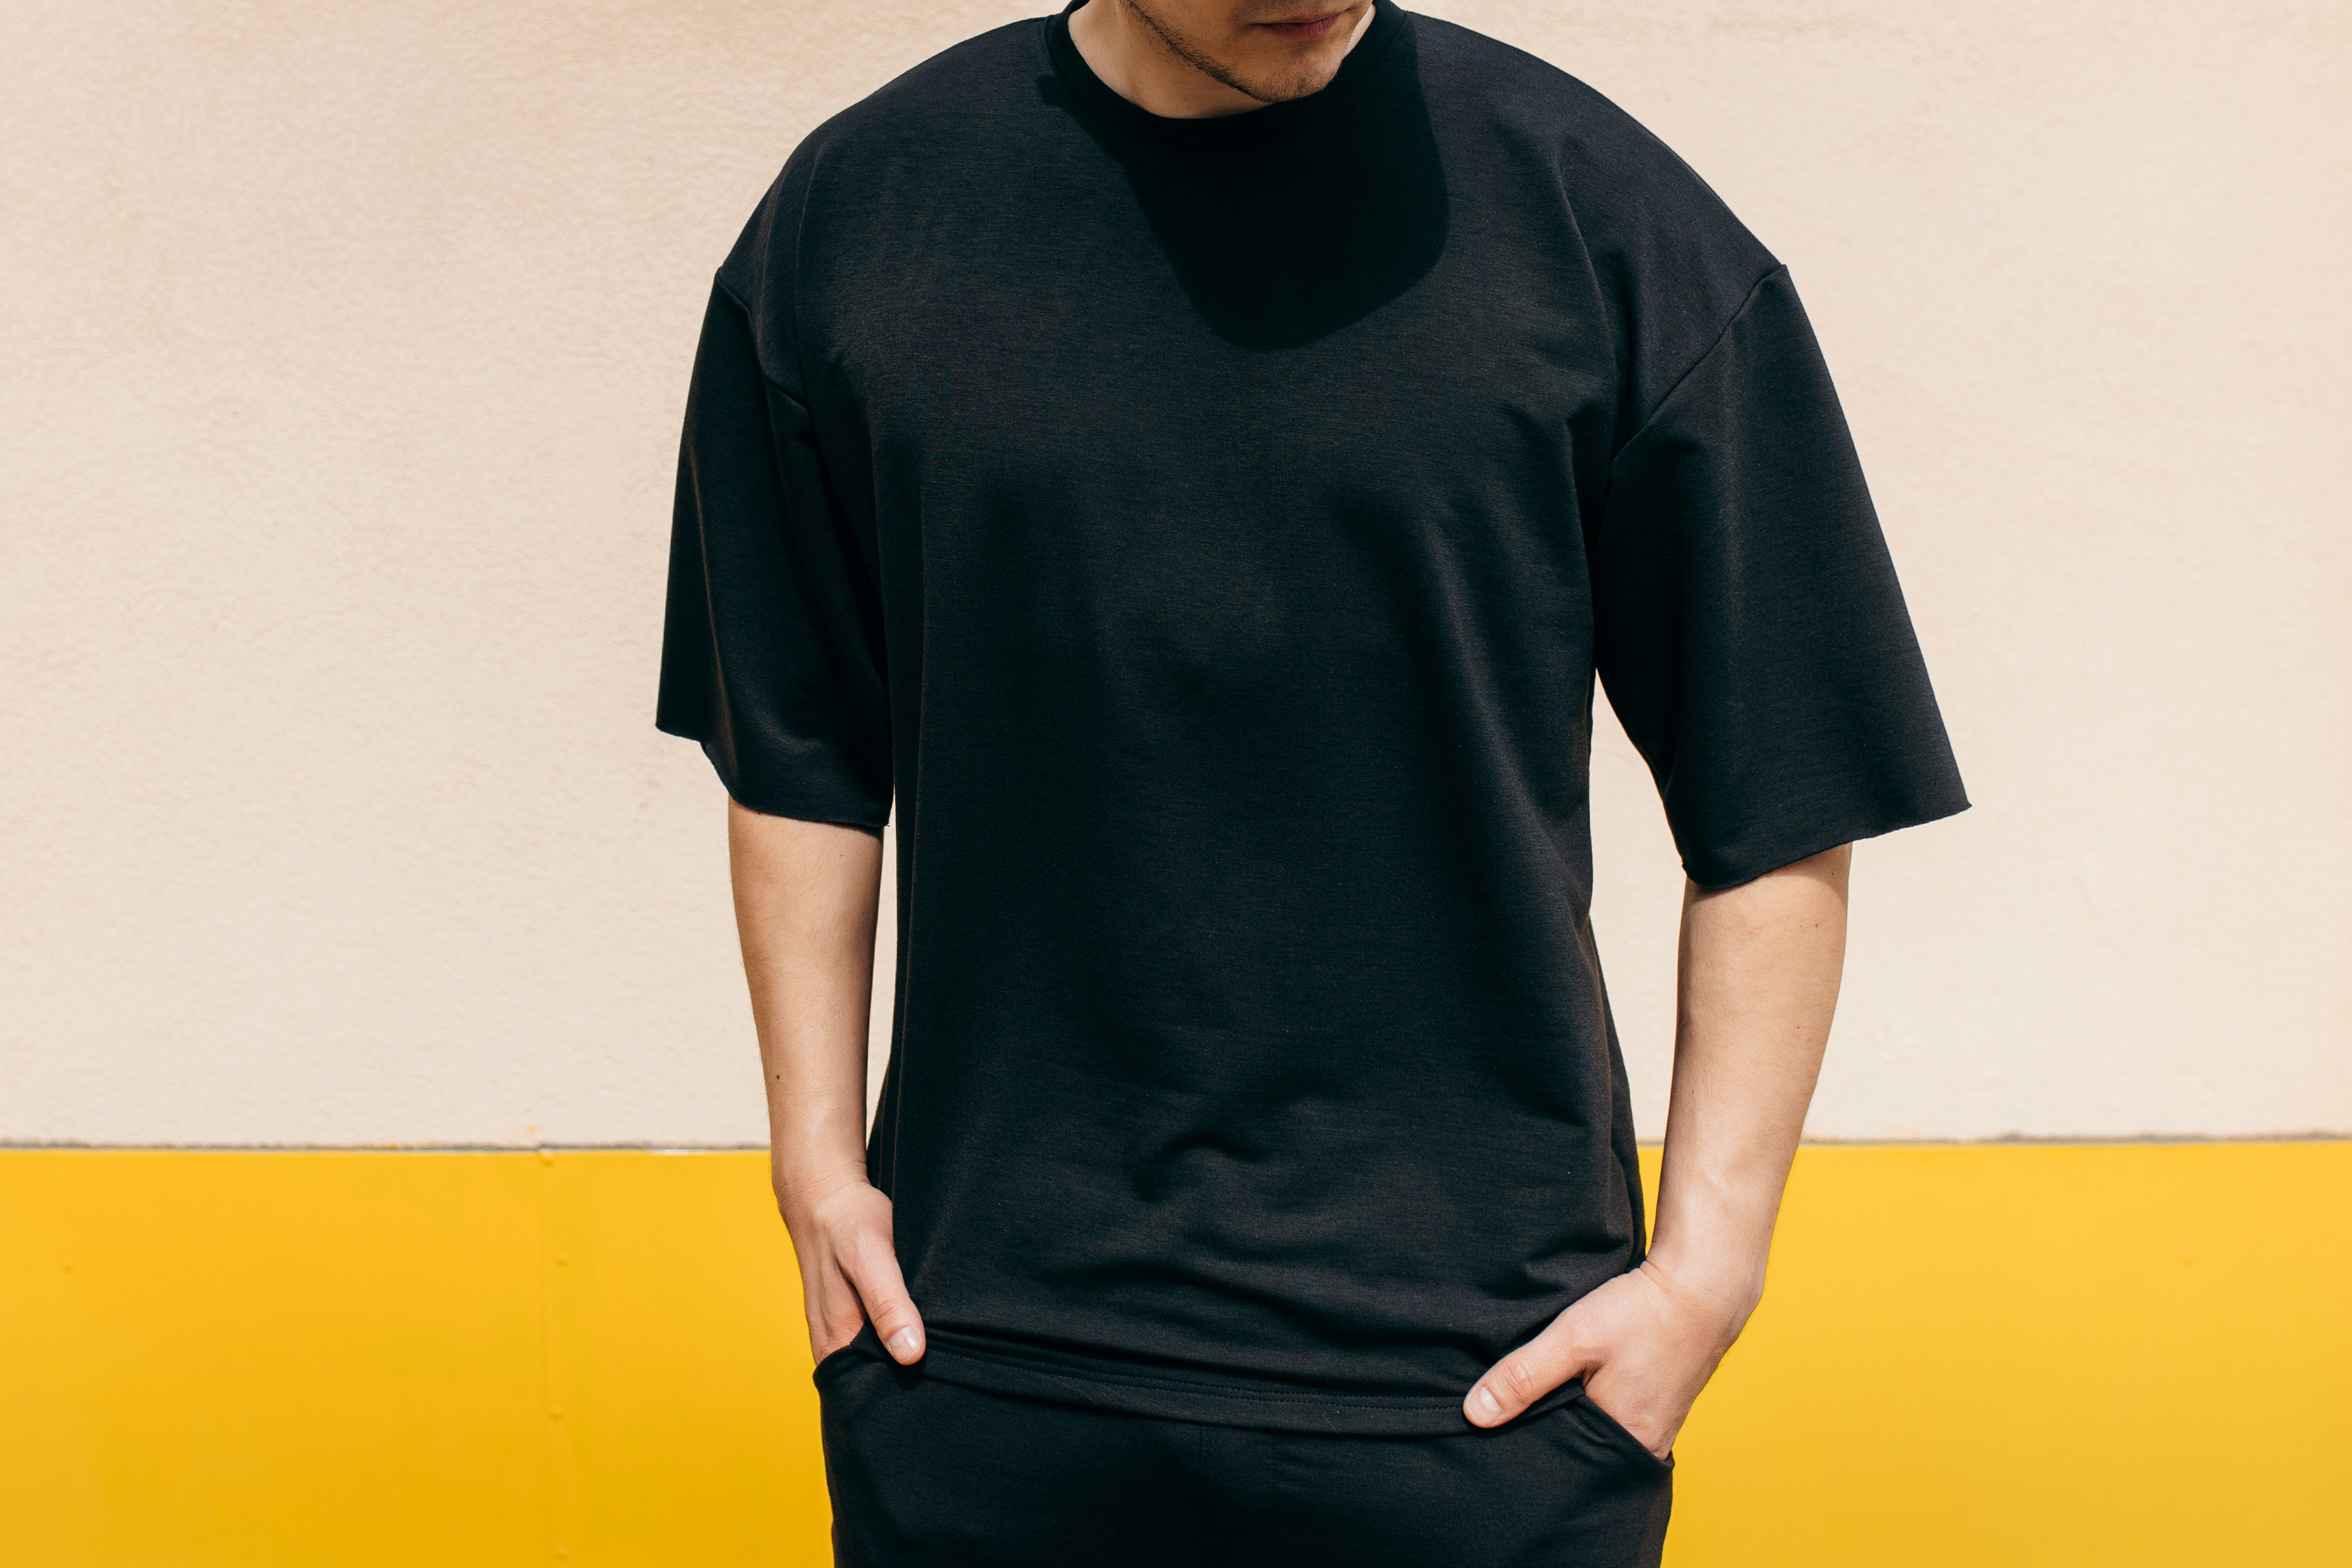 Men's Oversized T-shirt Outfit Ideas: How to Style Your Favourite Tee